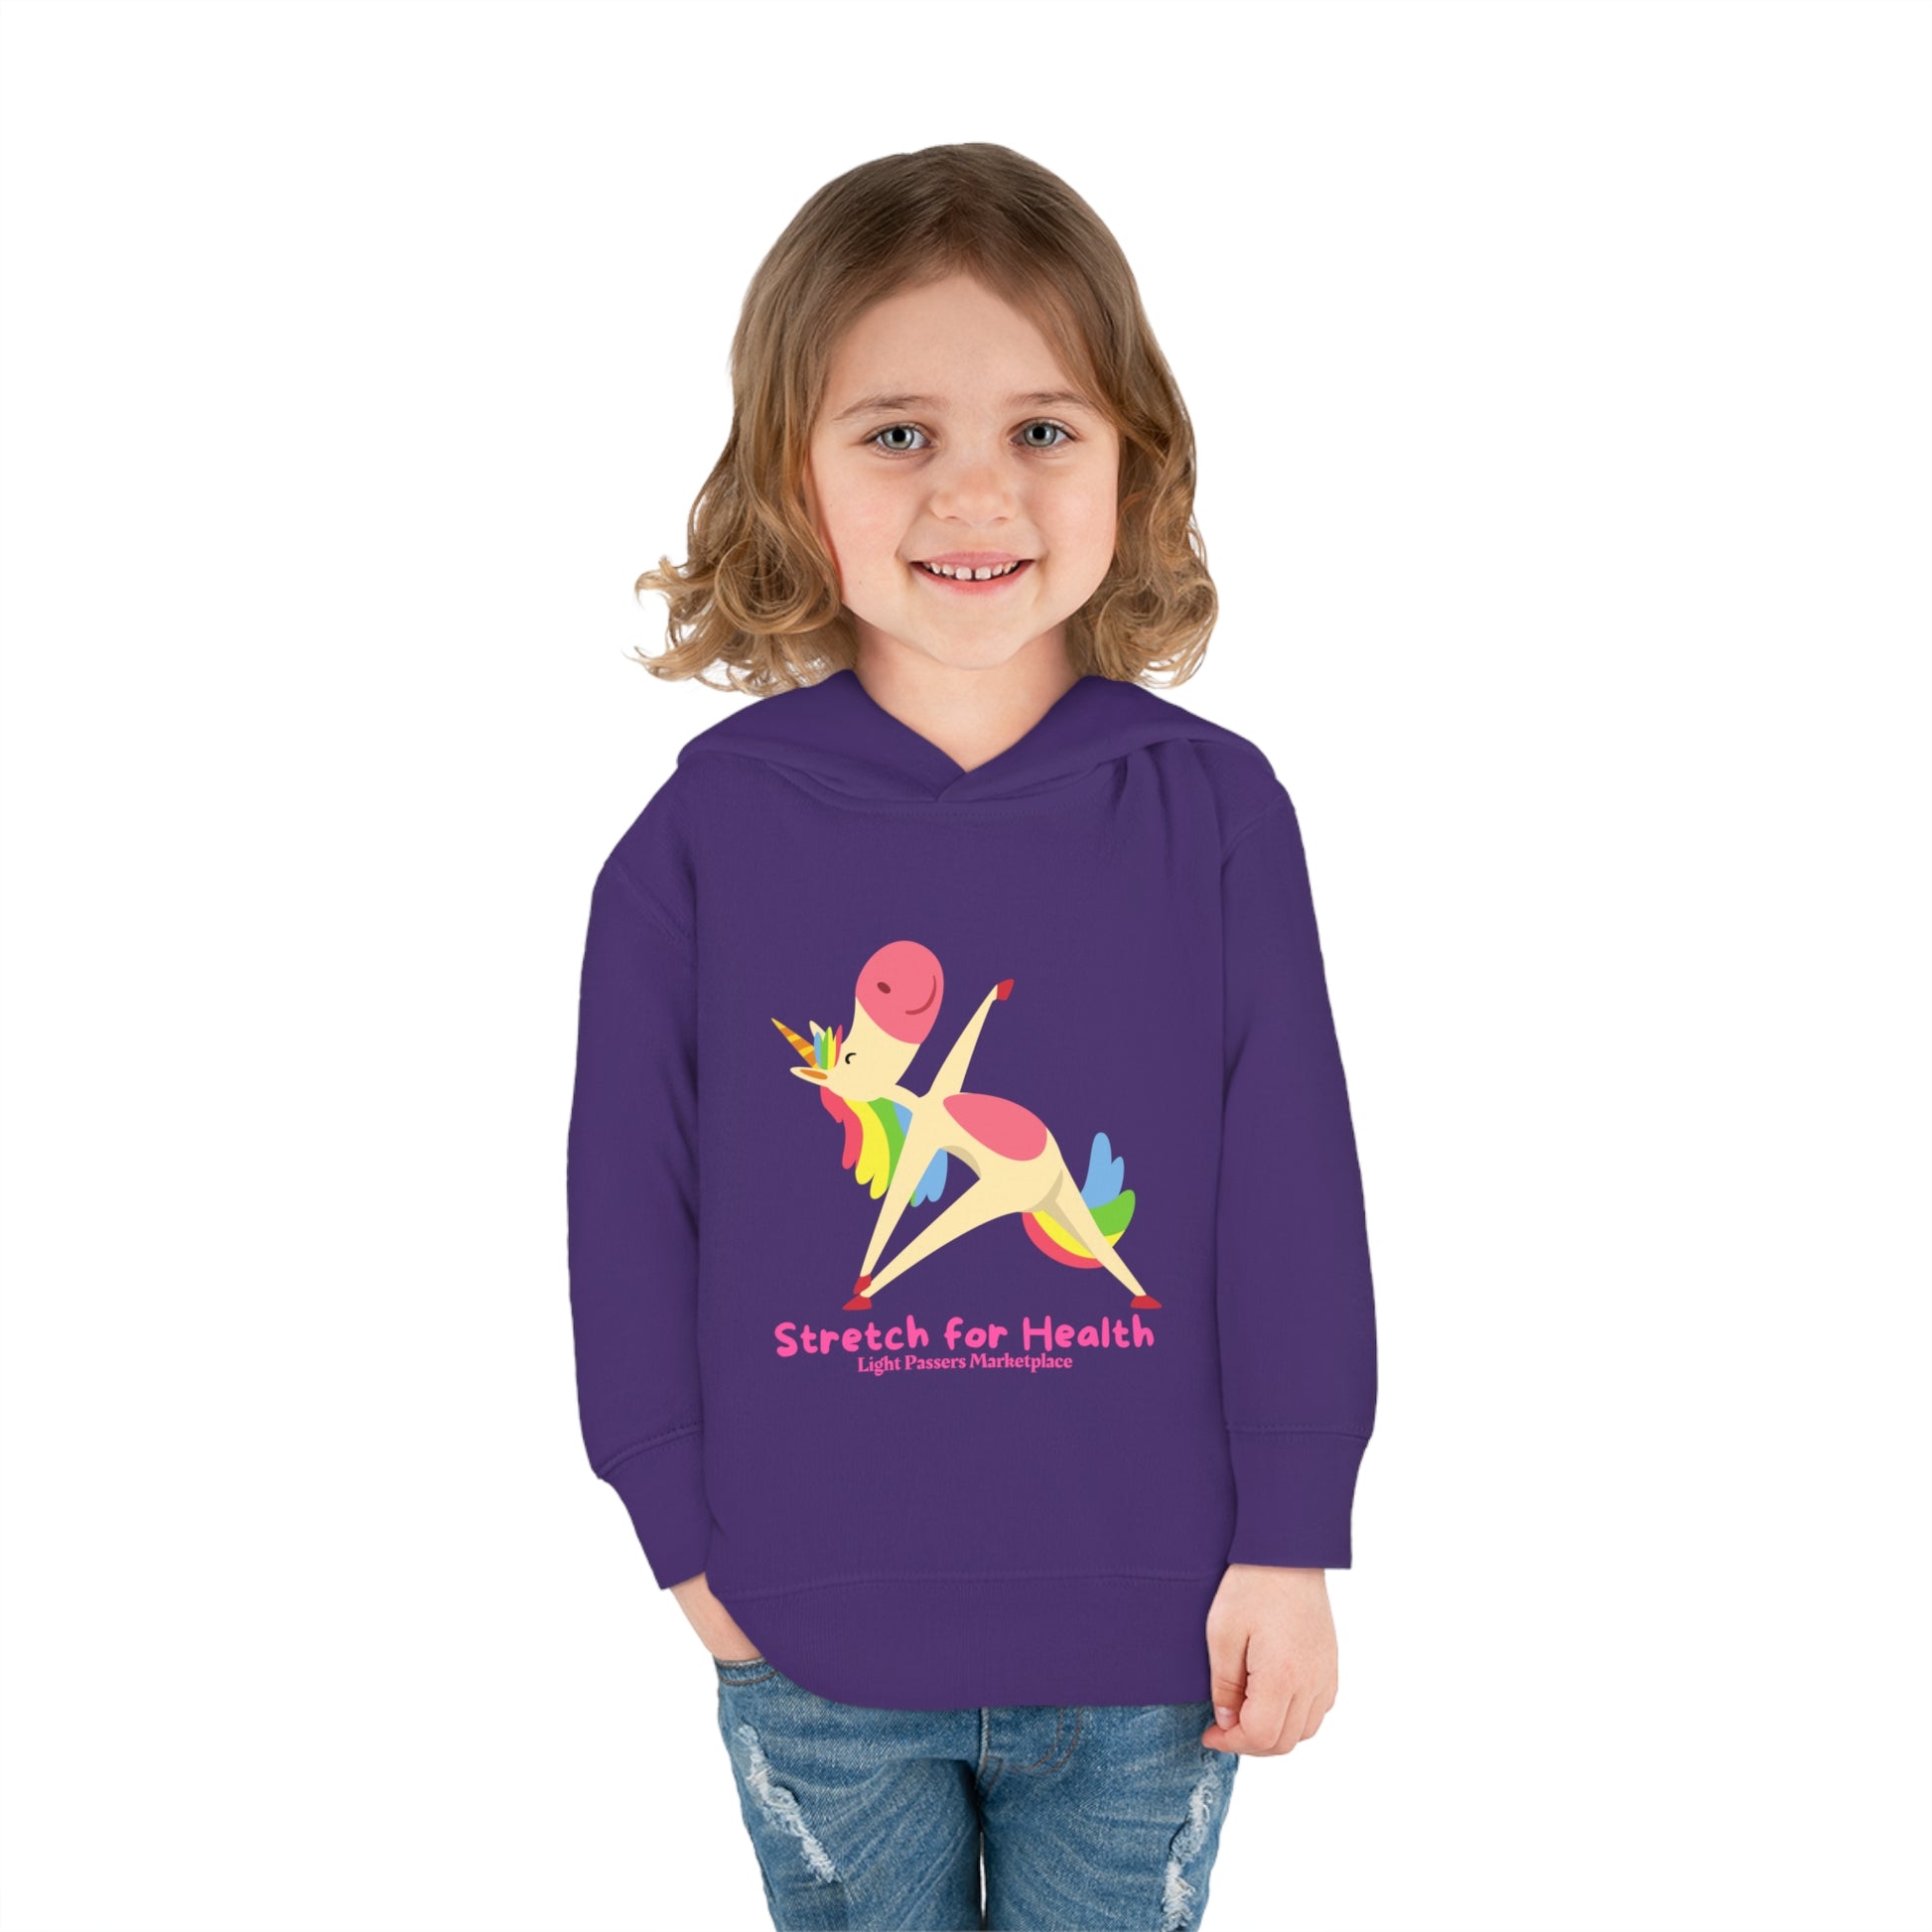 A smiling girl in a purple Rabbit Skins toddler hoodie with a unicorn design, showcasing jersey-lined hood, cover-stitched details, and side seam pockets for durable coziness.